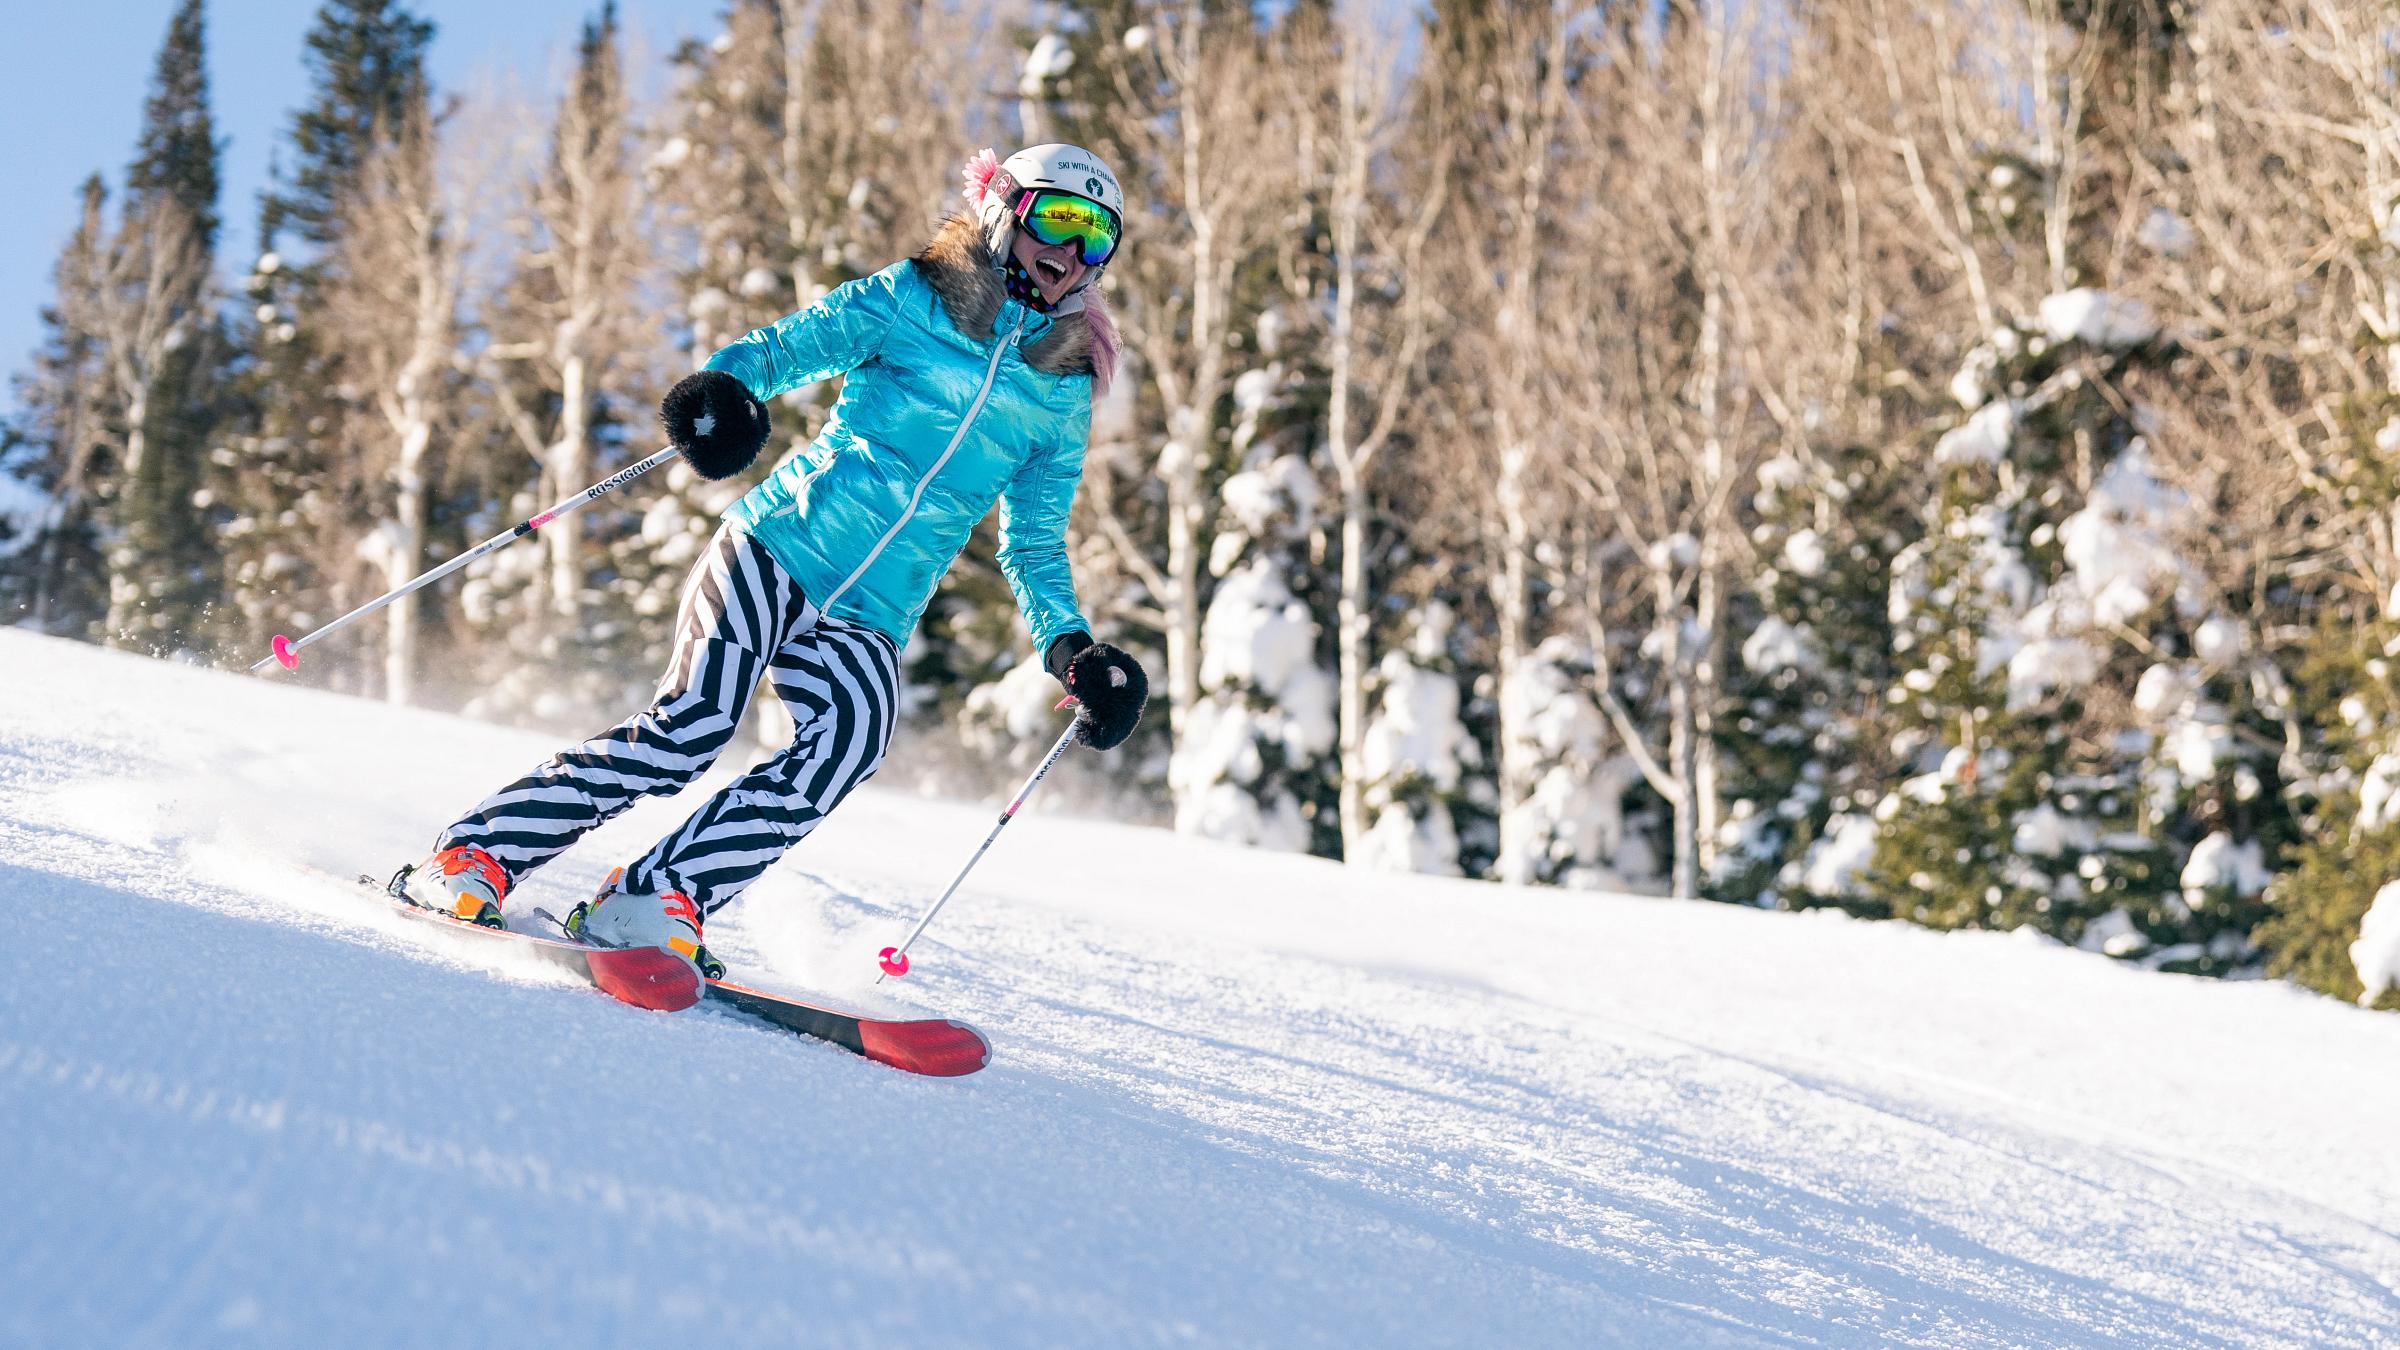 Shannon Buhrke of Deer Valley's "Ski With a Champion" program carves down the run Peeler. Jan. 10, 2022, Deer Valley Resort, Park City, UT. (Deer Valley Resort/Jason Peters)